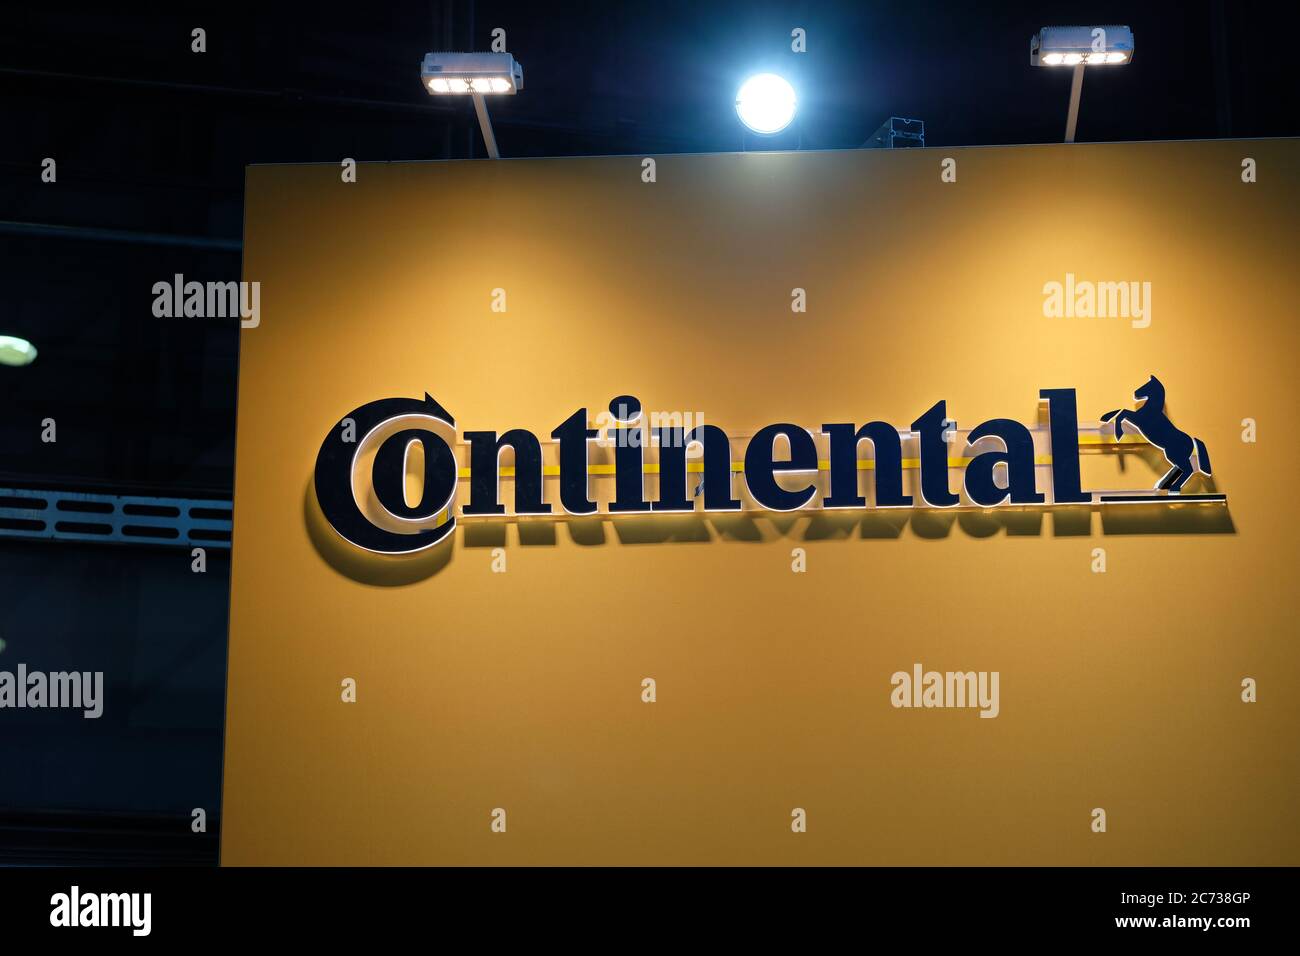 Continental Automotive logo on brown board. German automotive manufacturing car parts company. Supplier of automotive components. Stock Photo